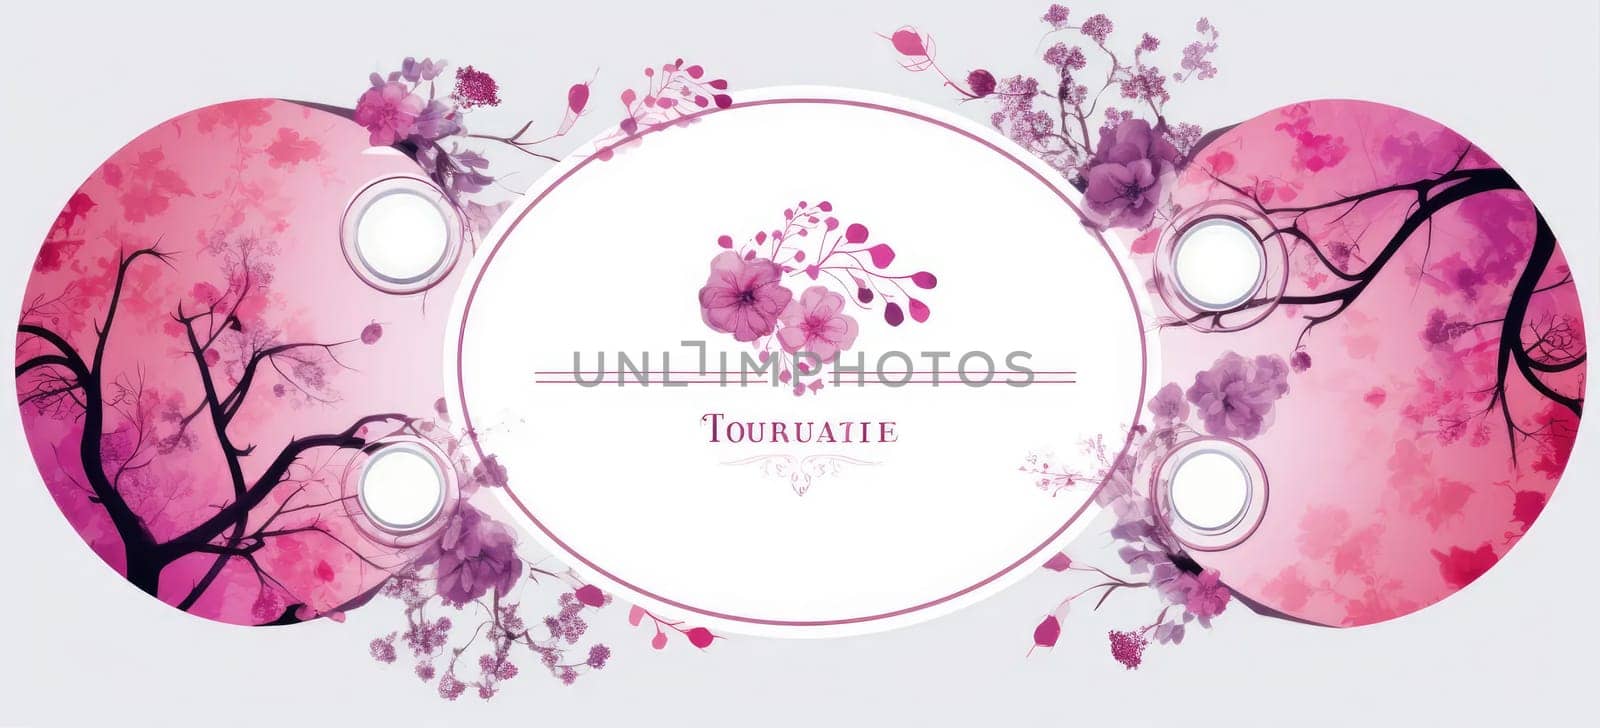 Family Tree: Purple and Pink Card with Oval Circles for Inserting Photos by Yurich32